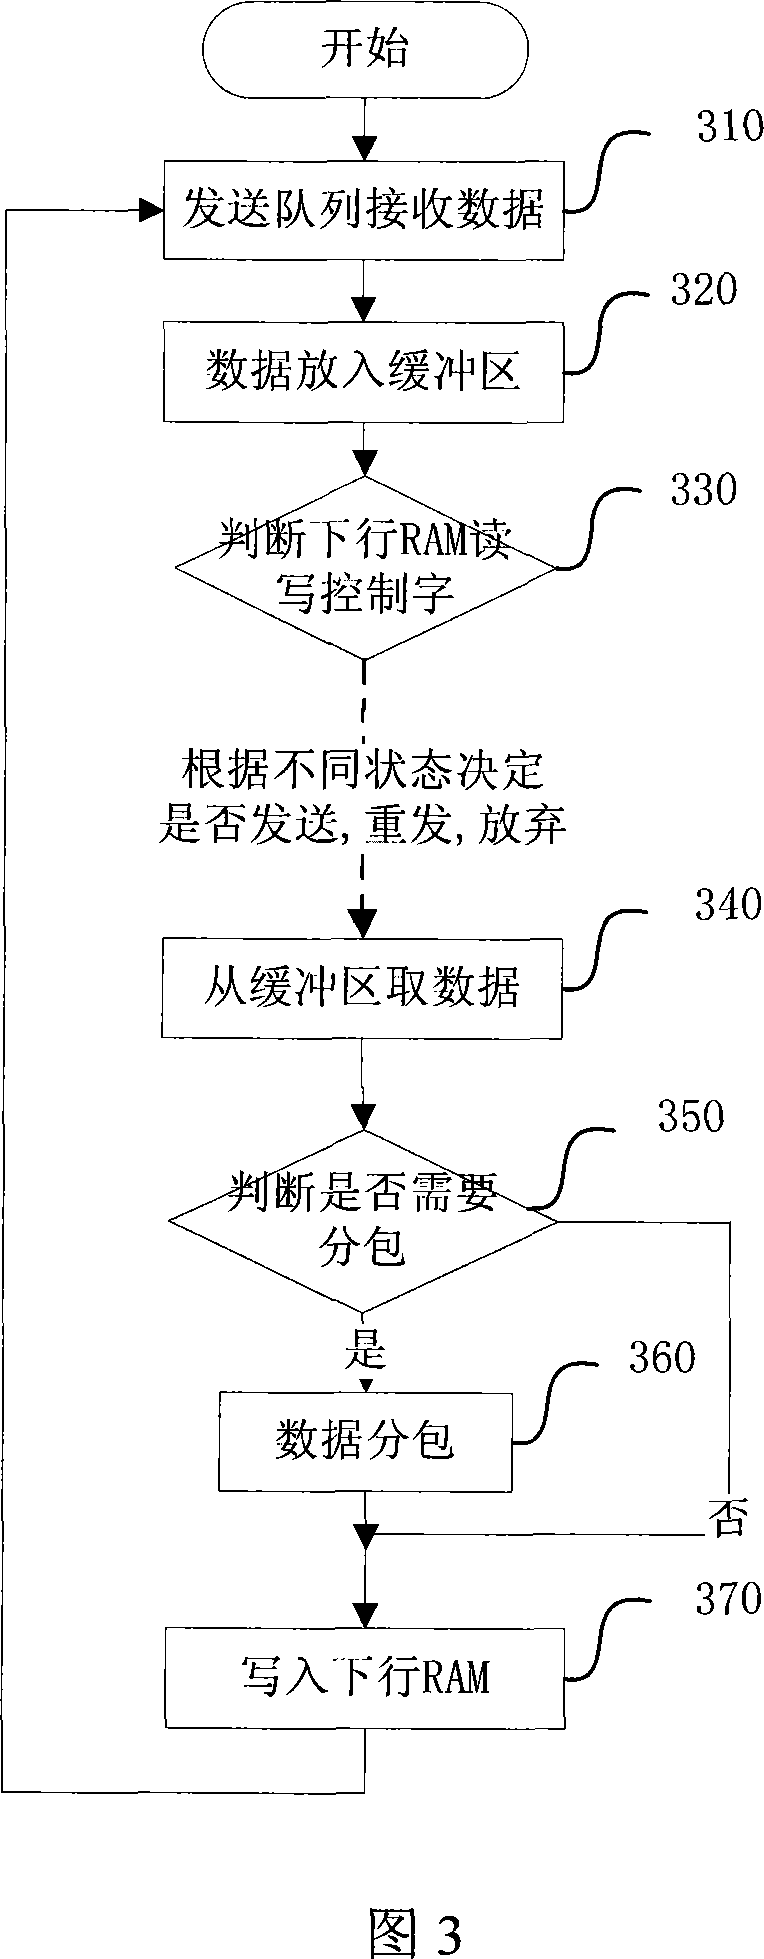 Data transmission and receiving method between network management system and transmission device